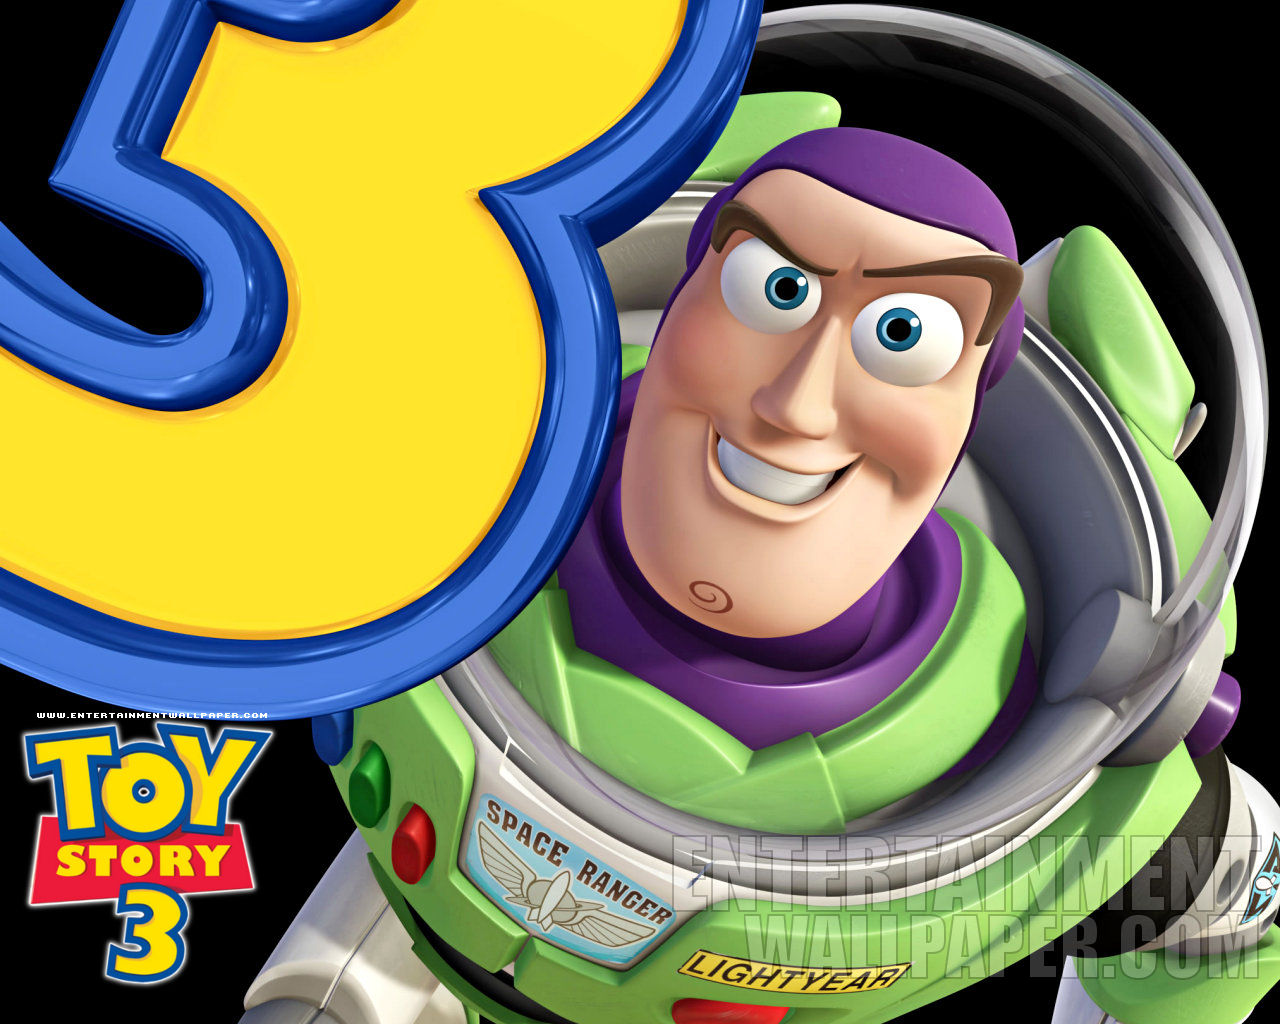 Toy Story 3 Movie 24568 Hd Wallpapers in Movies   Imagescicom